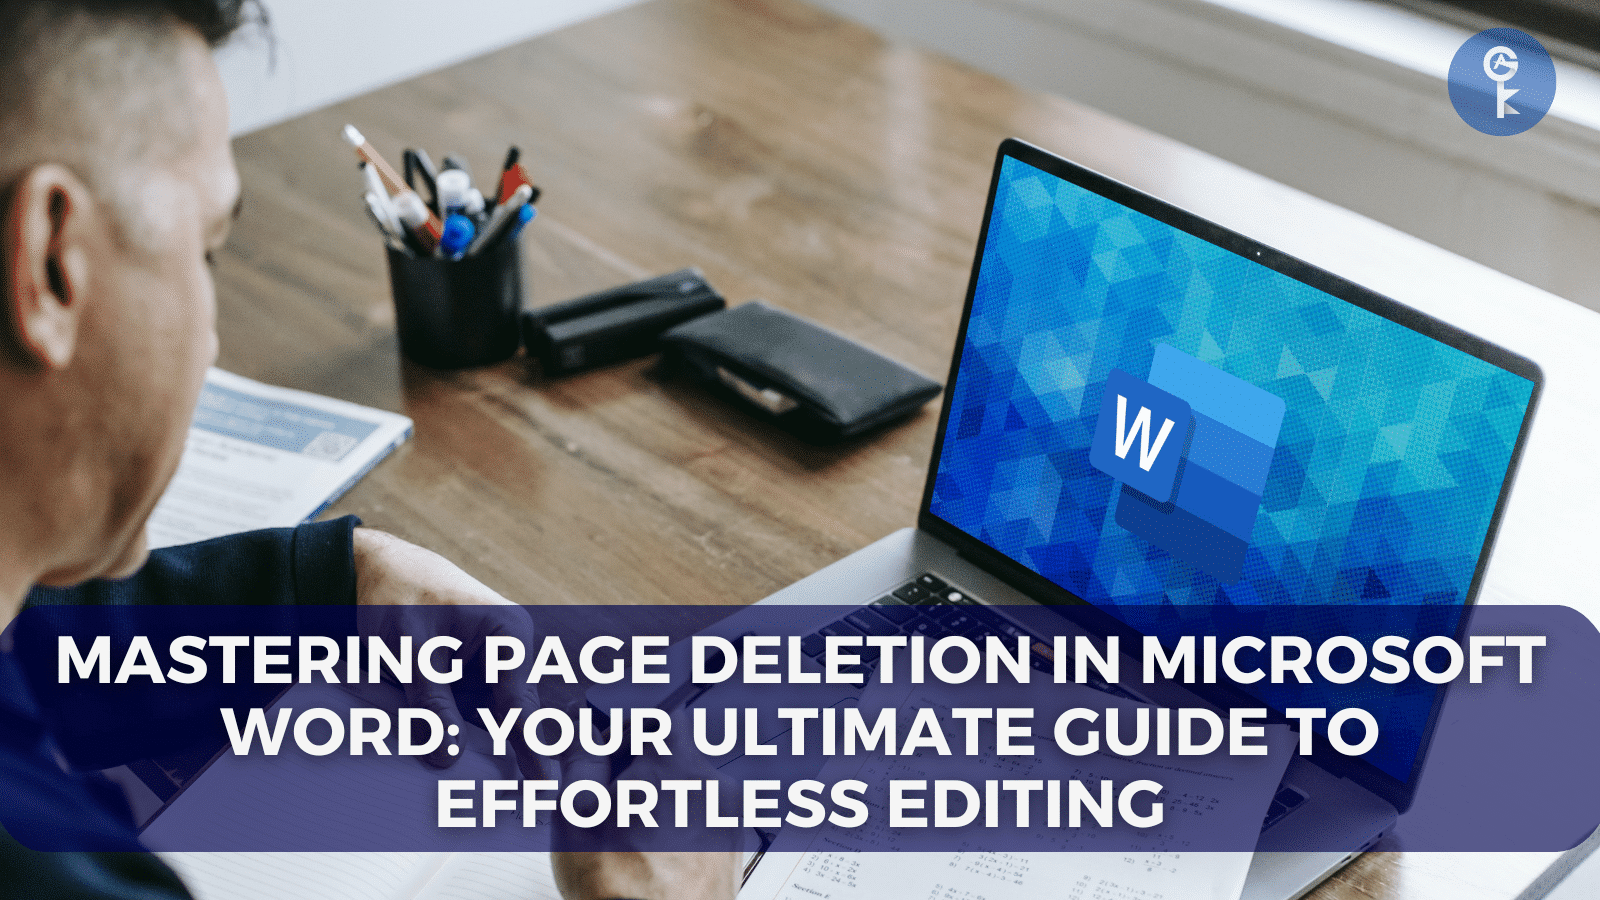 Mastering Page Deletion in Microsoft Word: Your Ultimate Guide to Effortless Editing